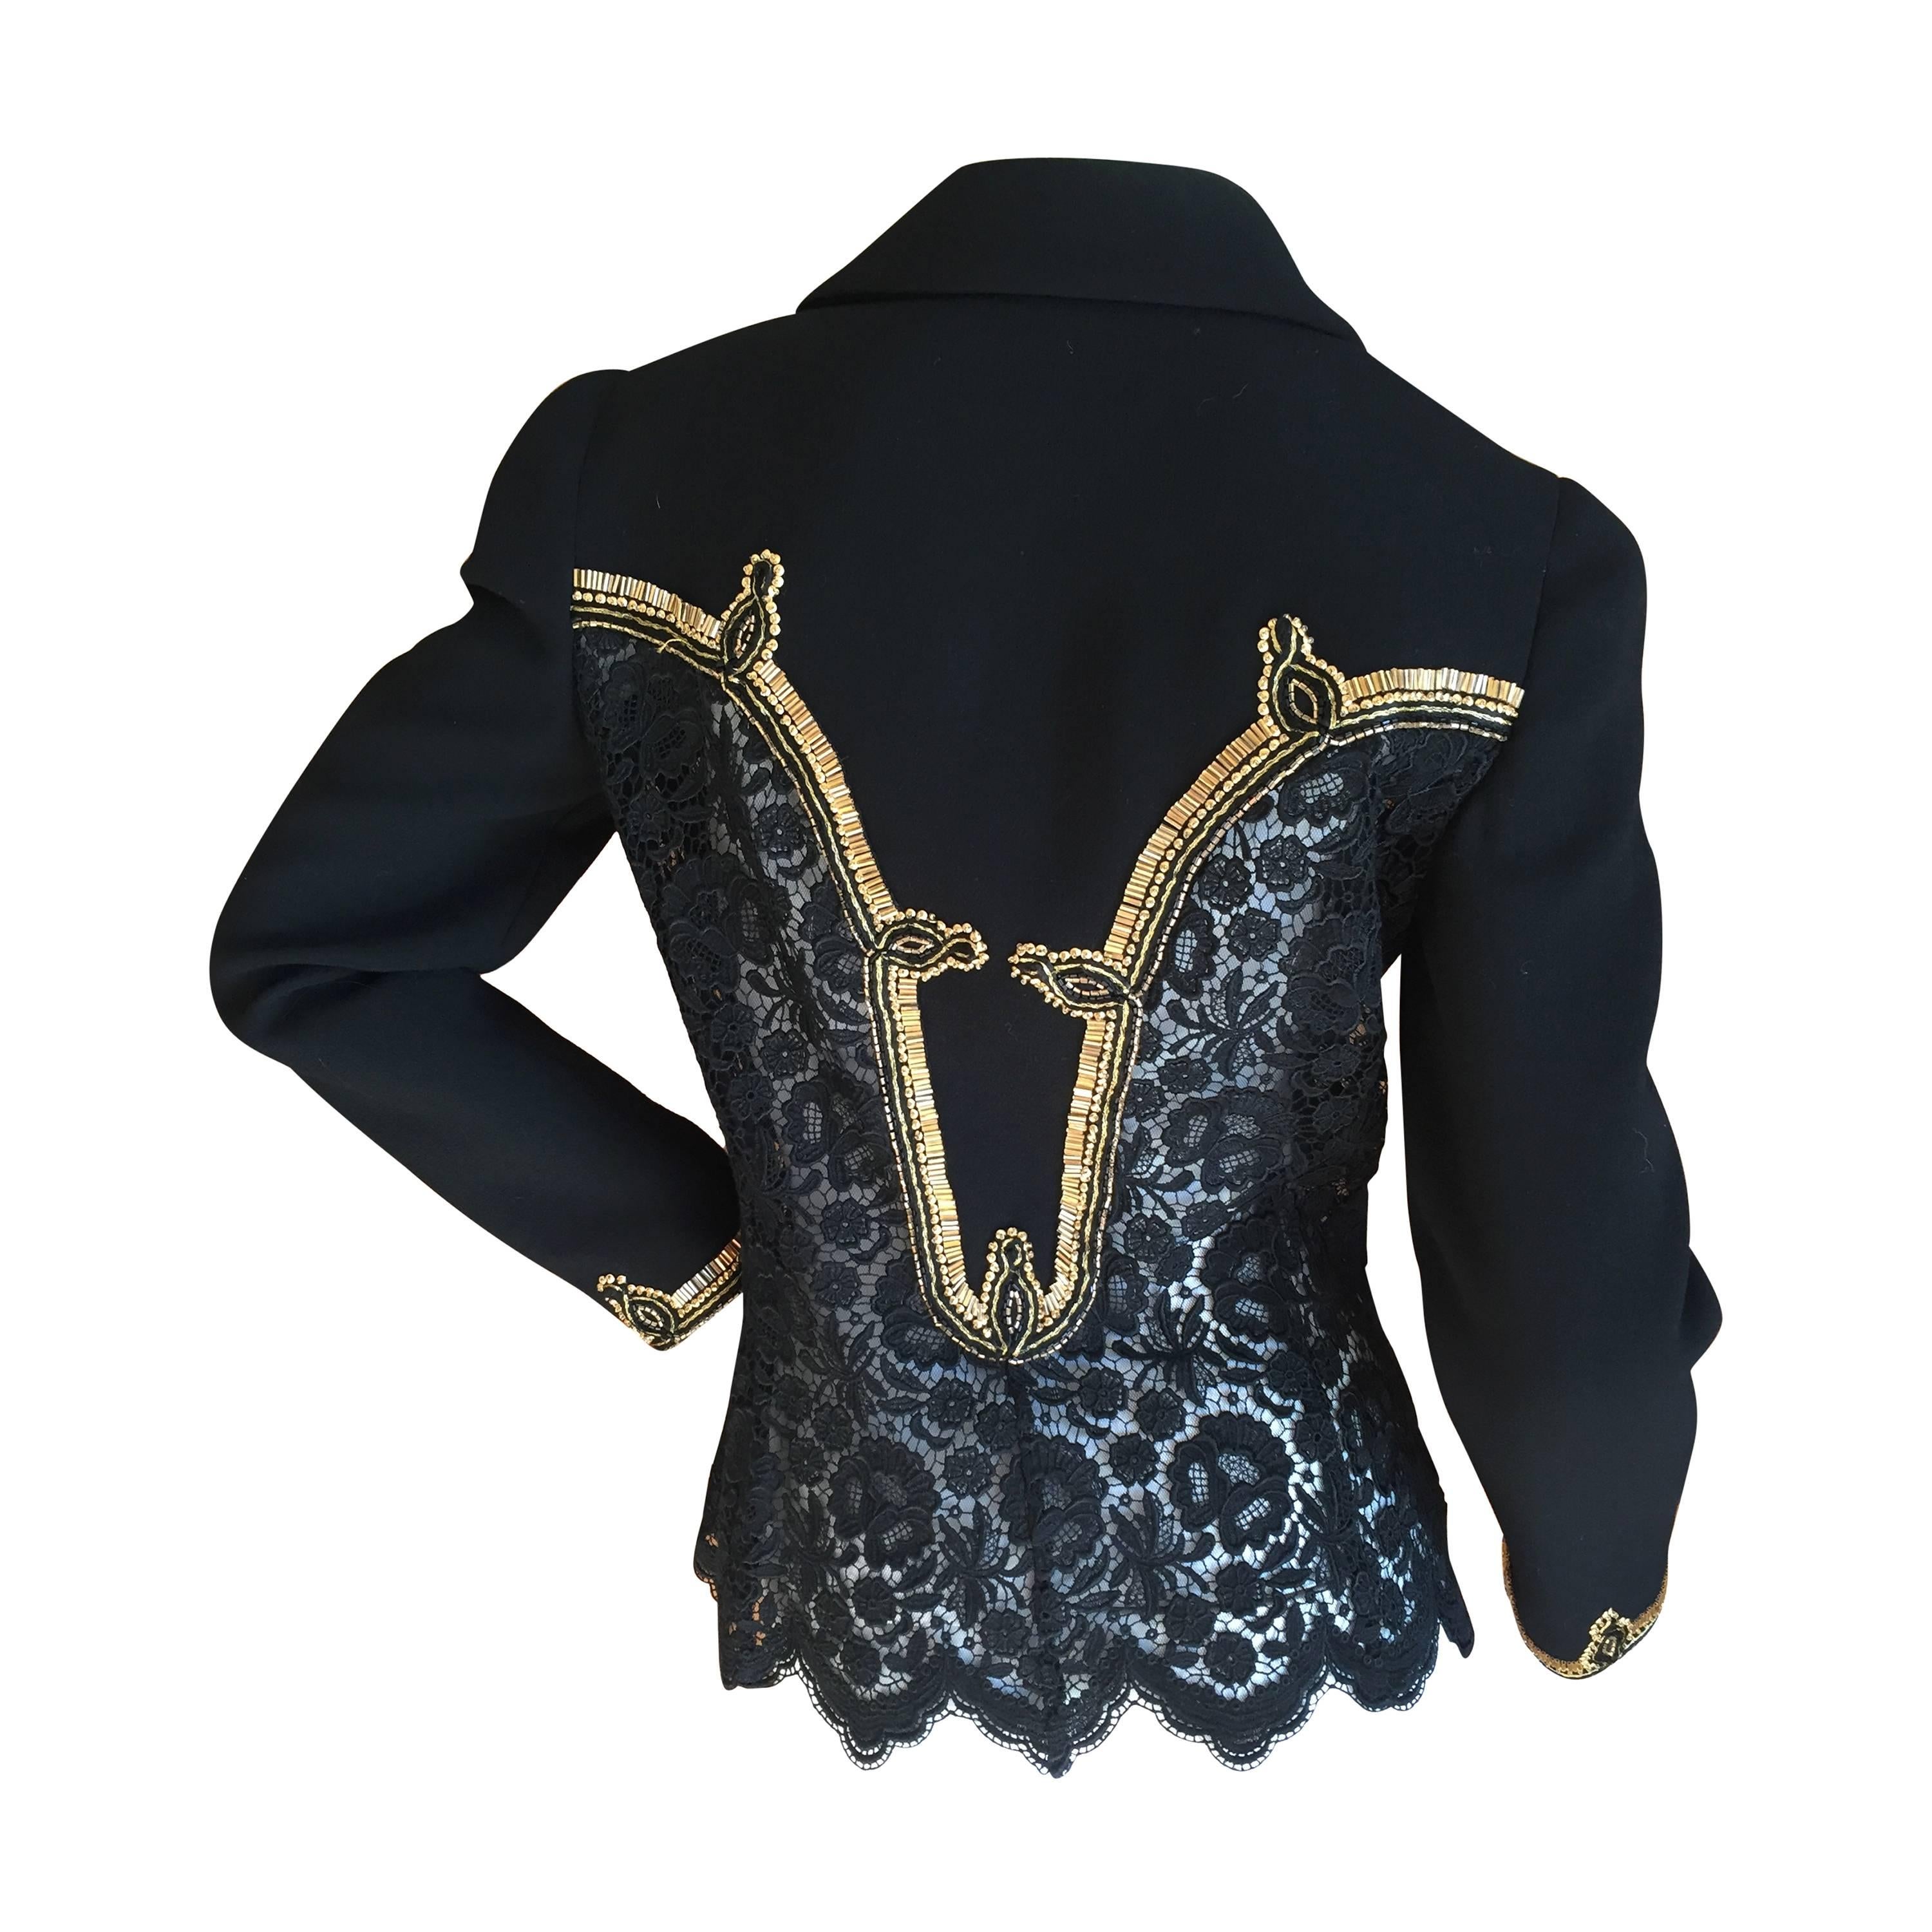 Gianni Versace Couture 1992 Beaded Black Lace Jacket For Sale